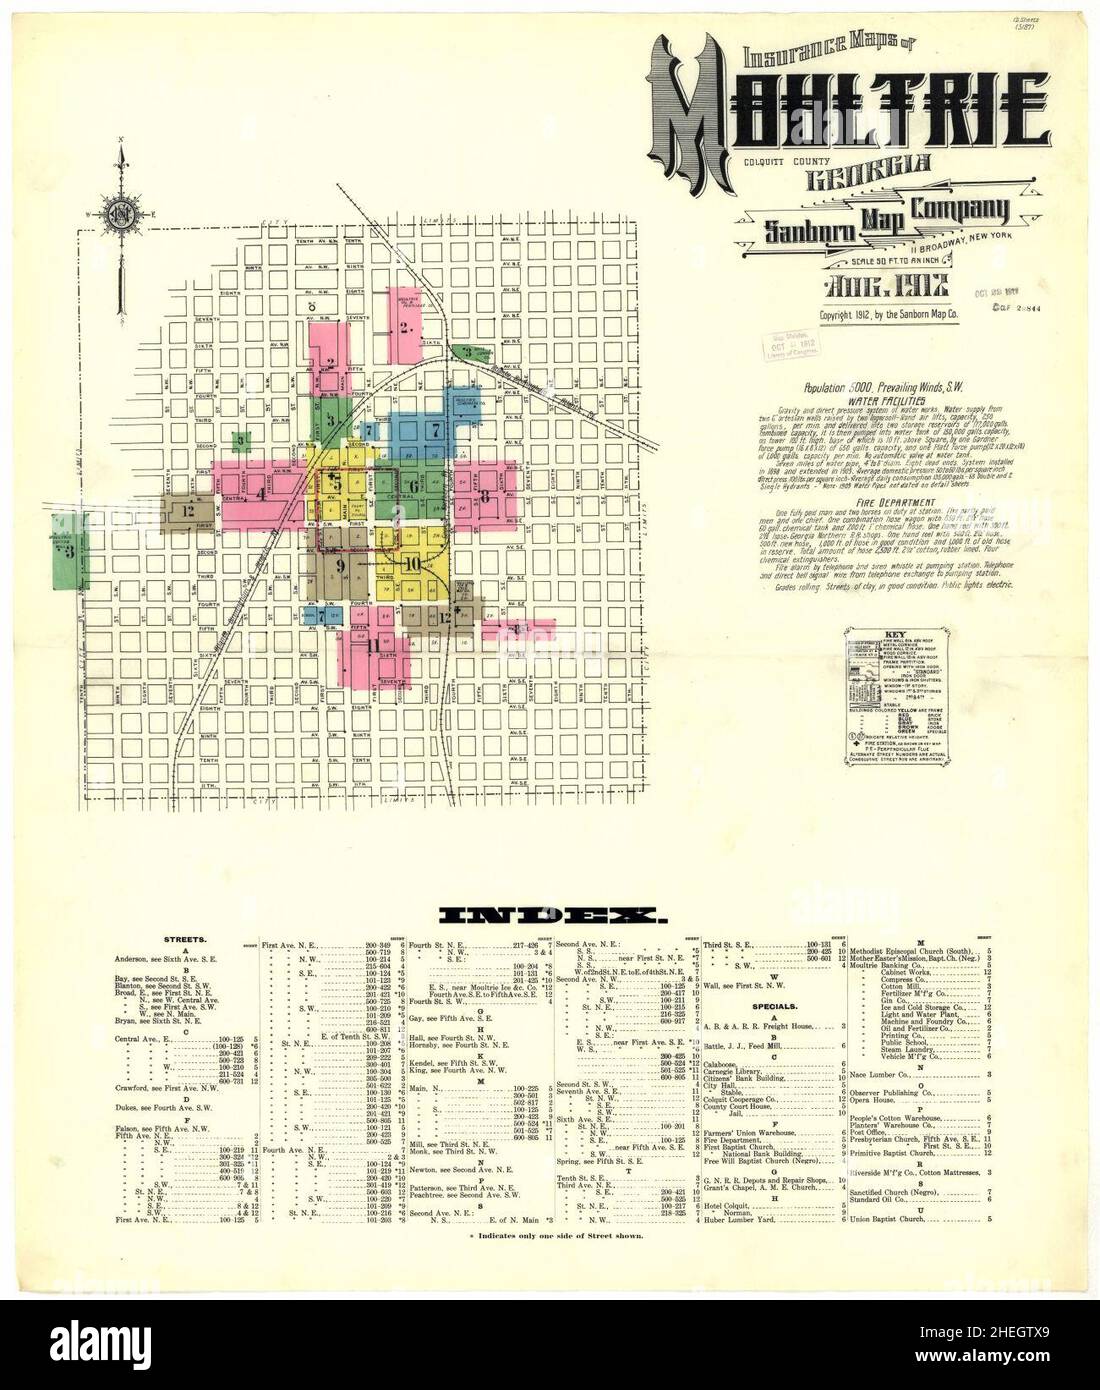 Sanborn Fire Insurance Map from Moultrie, Colquitt County, Georgia. Stock Photo